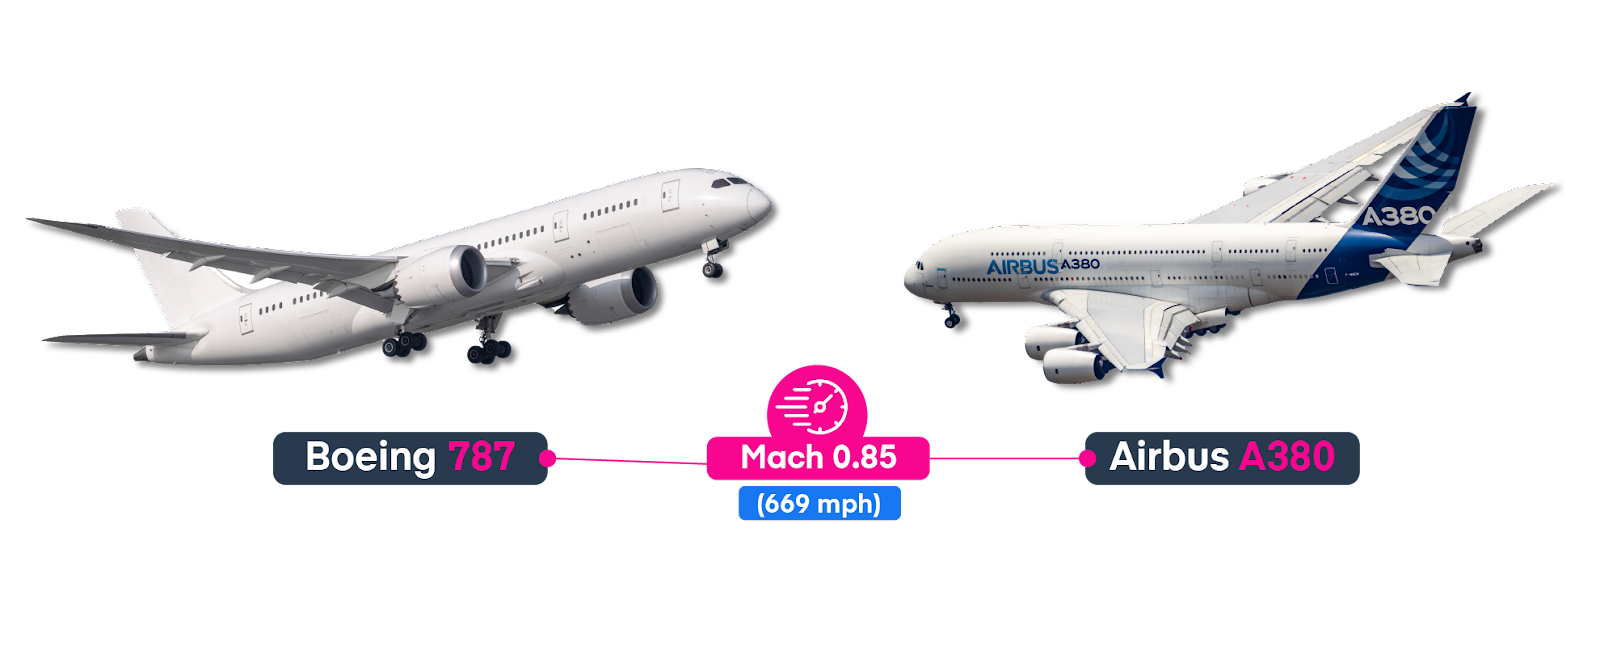 Boeing 787 and Airbus A380.